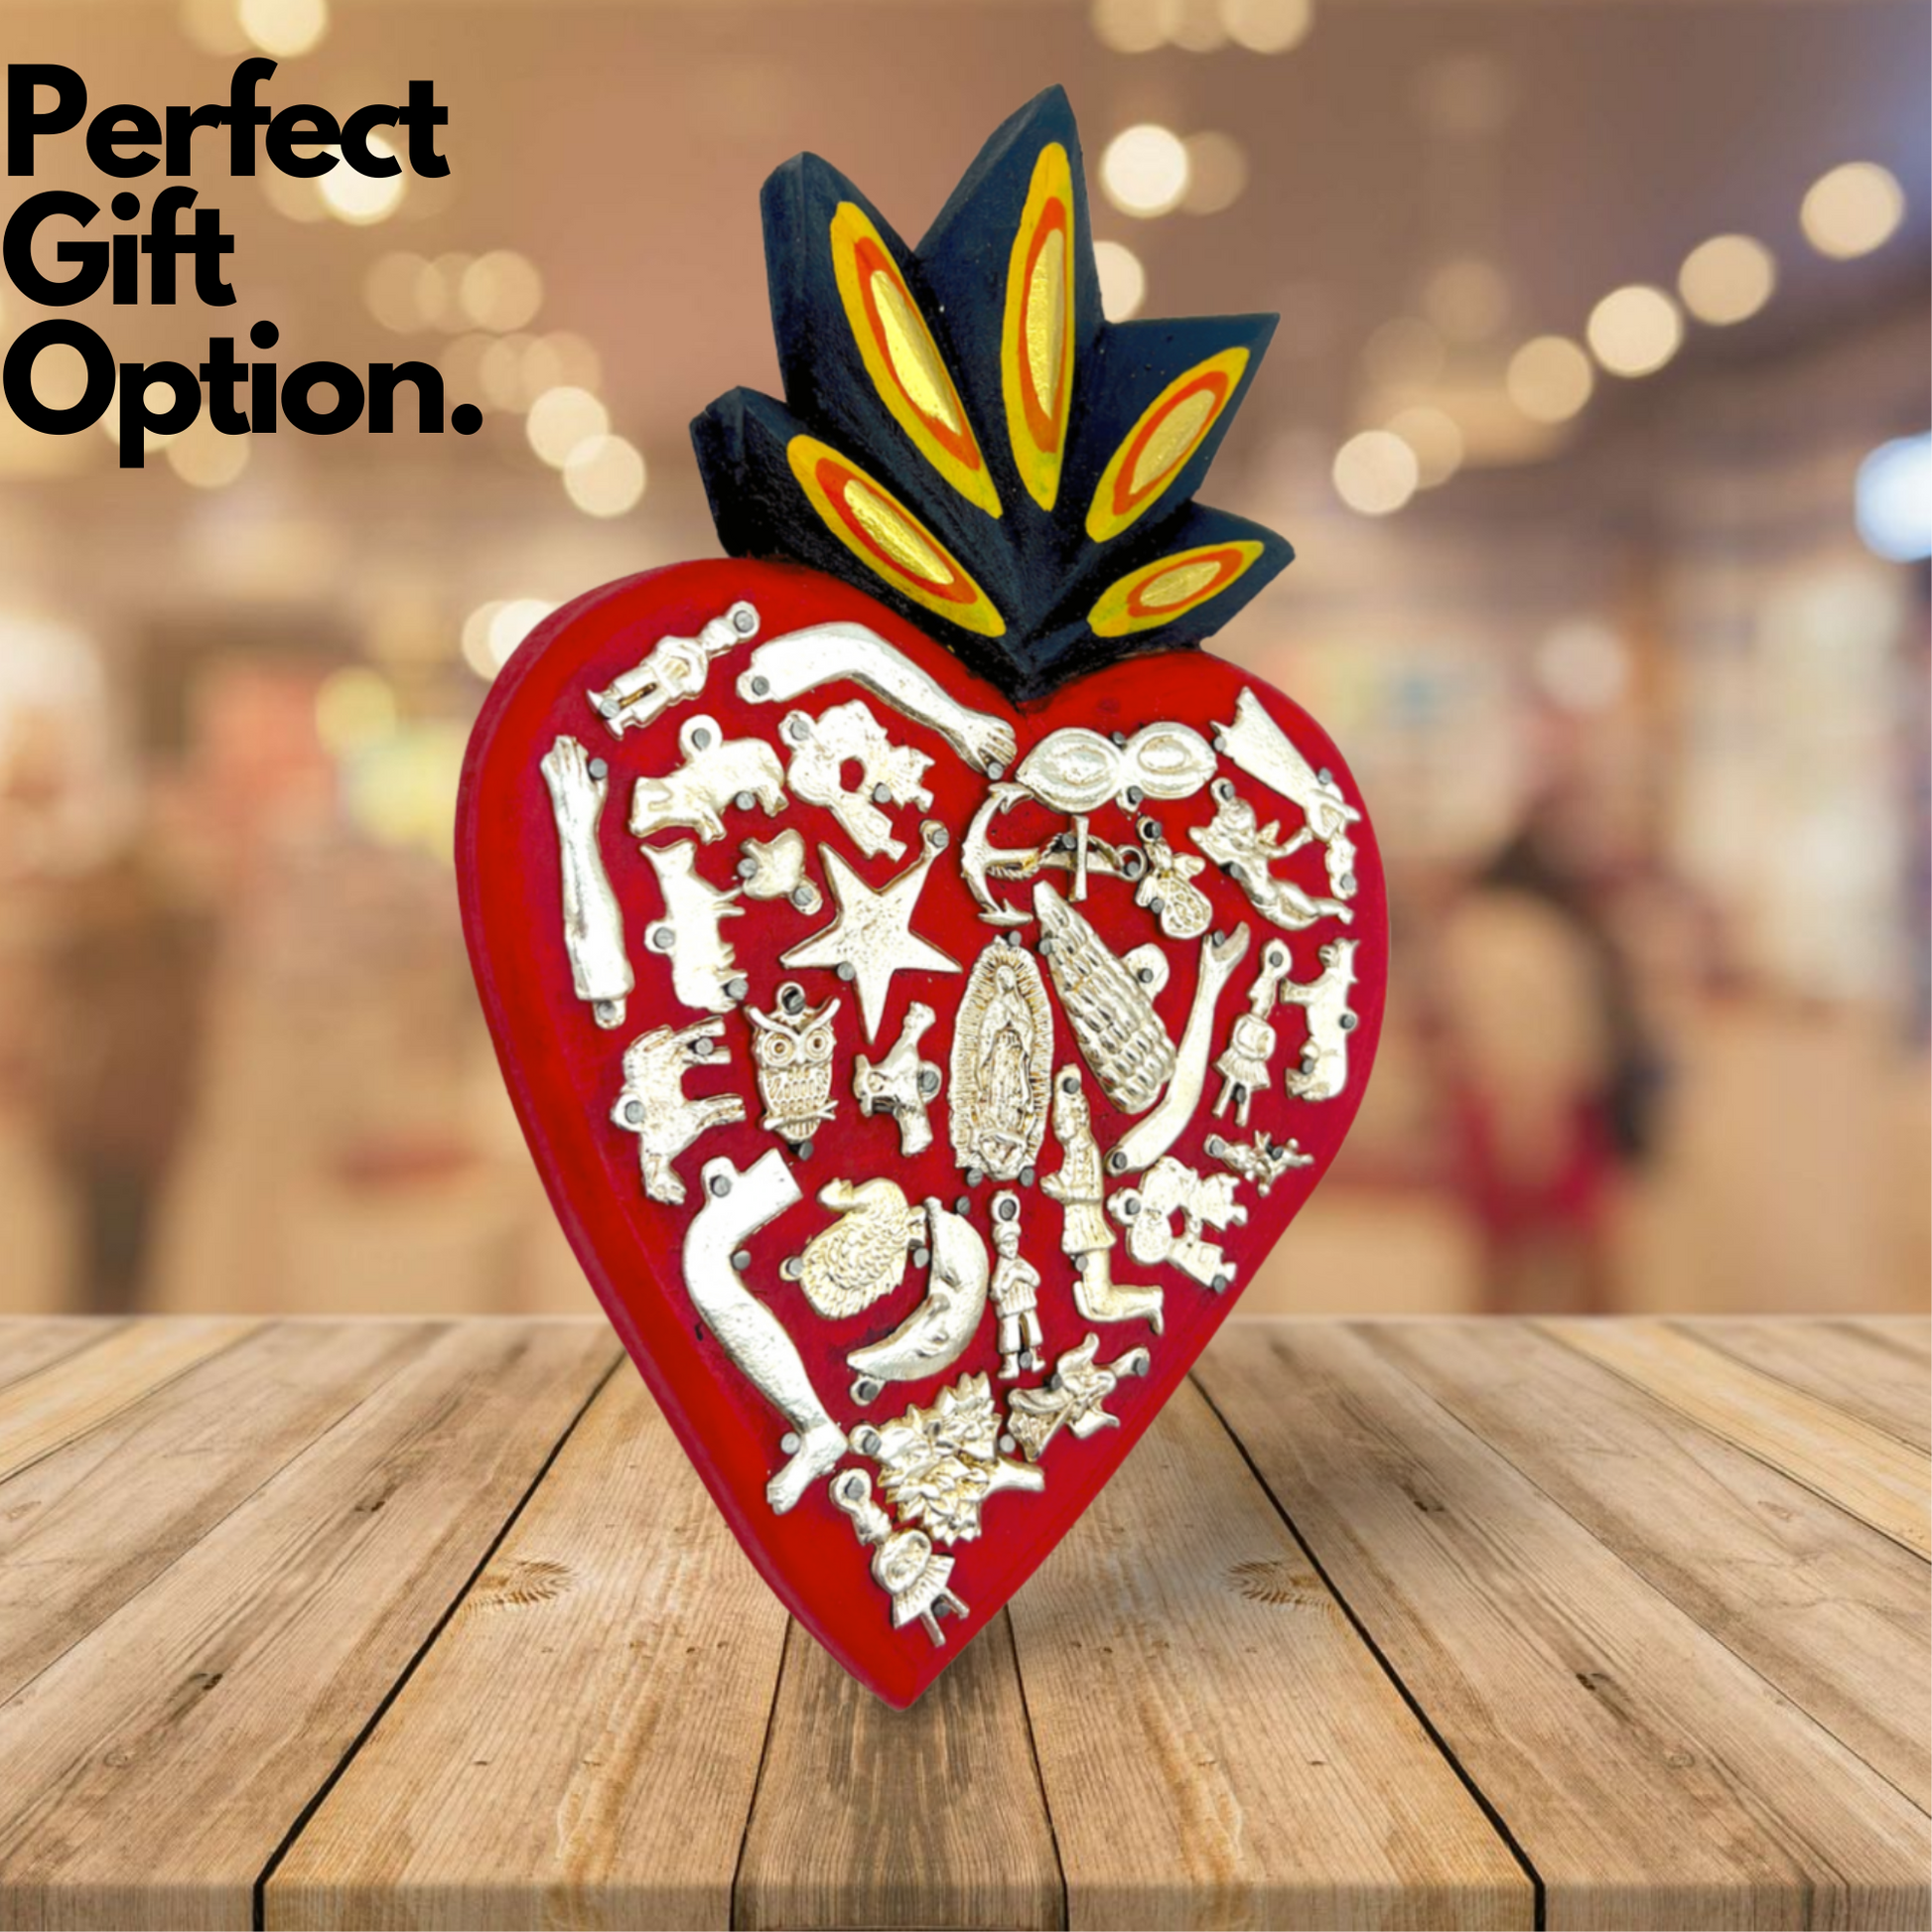 perferct gift option Ex Voto Wooden Sacred Heart, hand-painted by Mexican artisans, featuring colorful milagros, perfect for wall decor and enhancing your space.